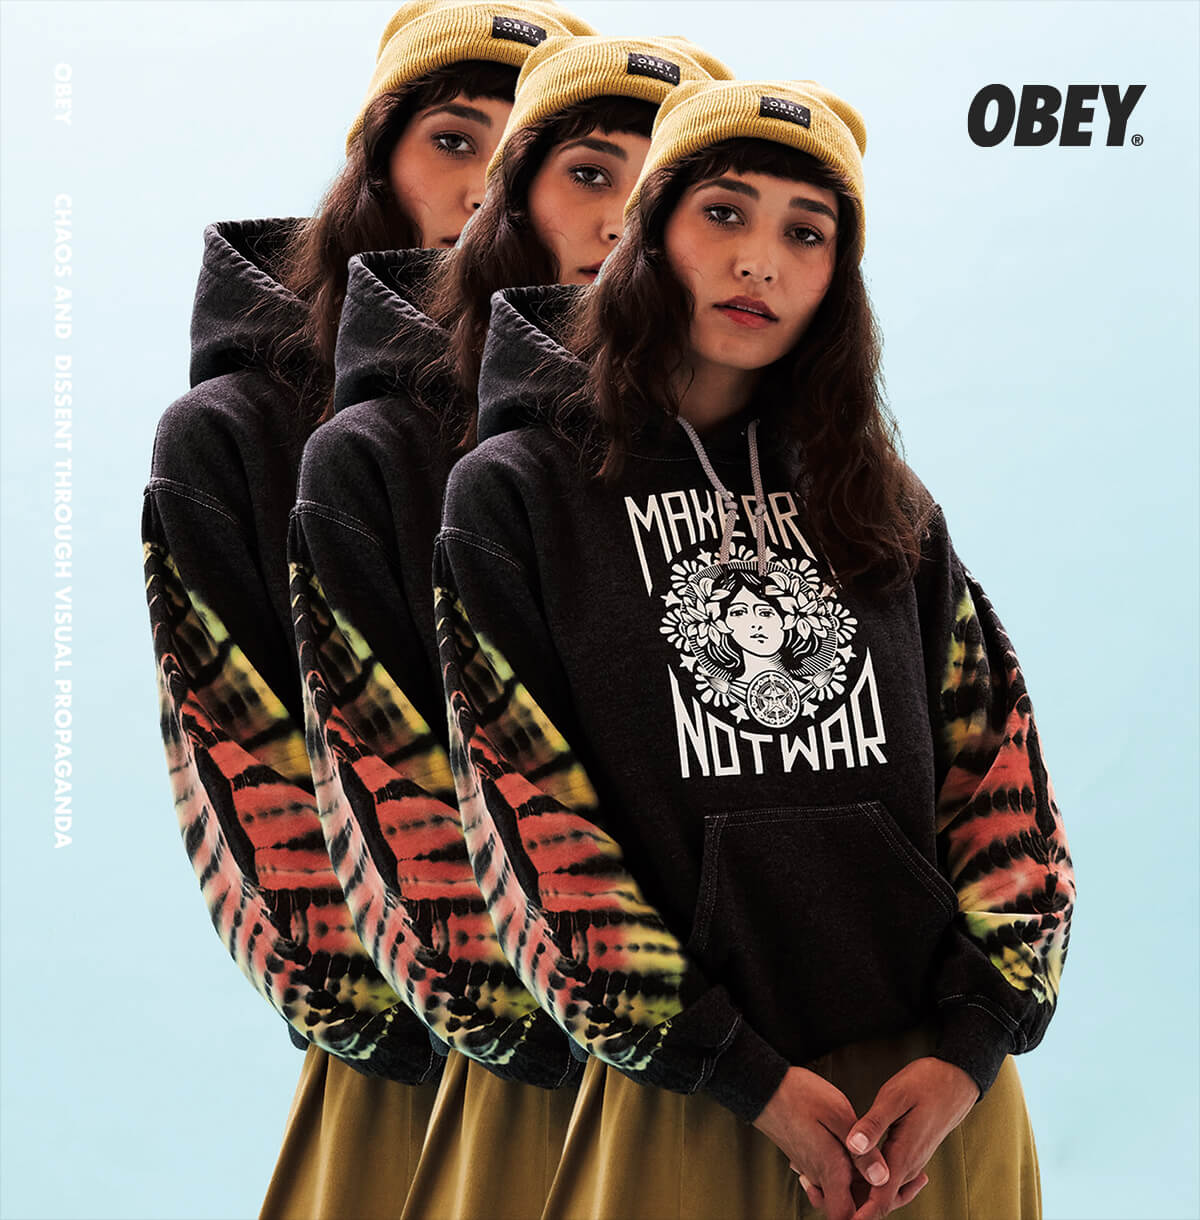 WOMEN'S NEW ARRIVAL HOODIES FEAT. OBEY AND MORE - SHOP HOODIES